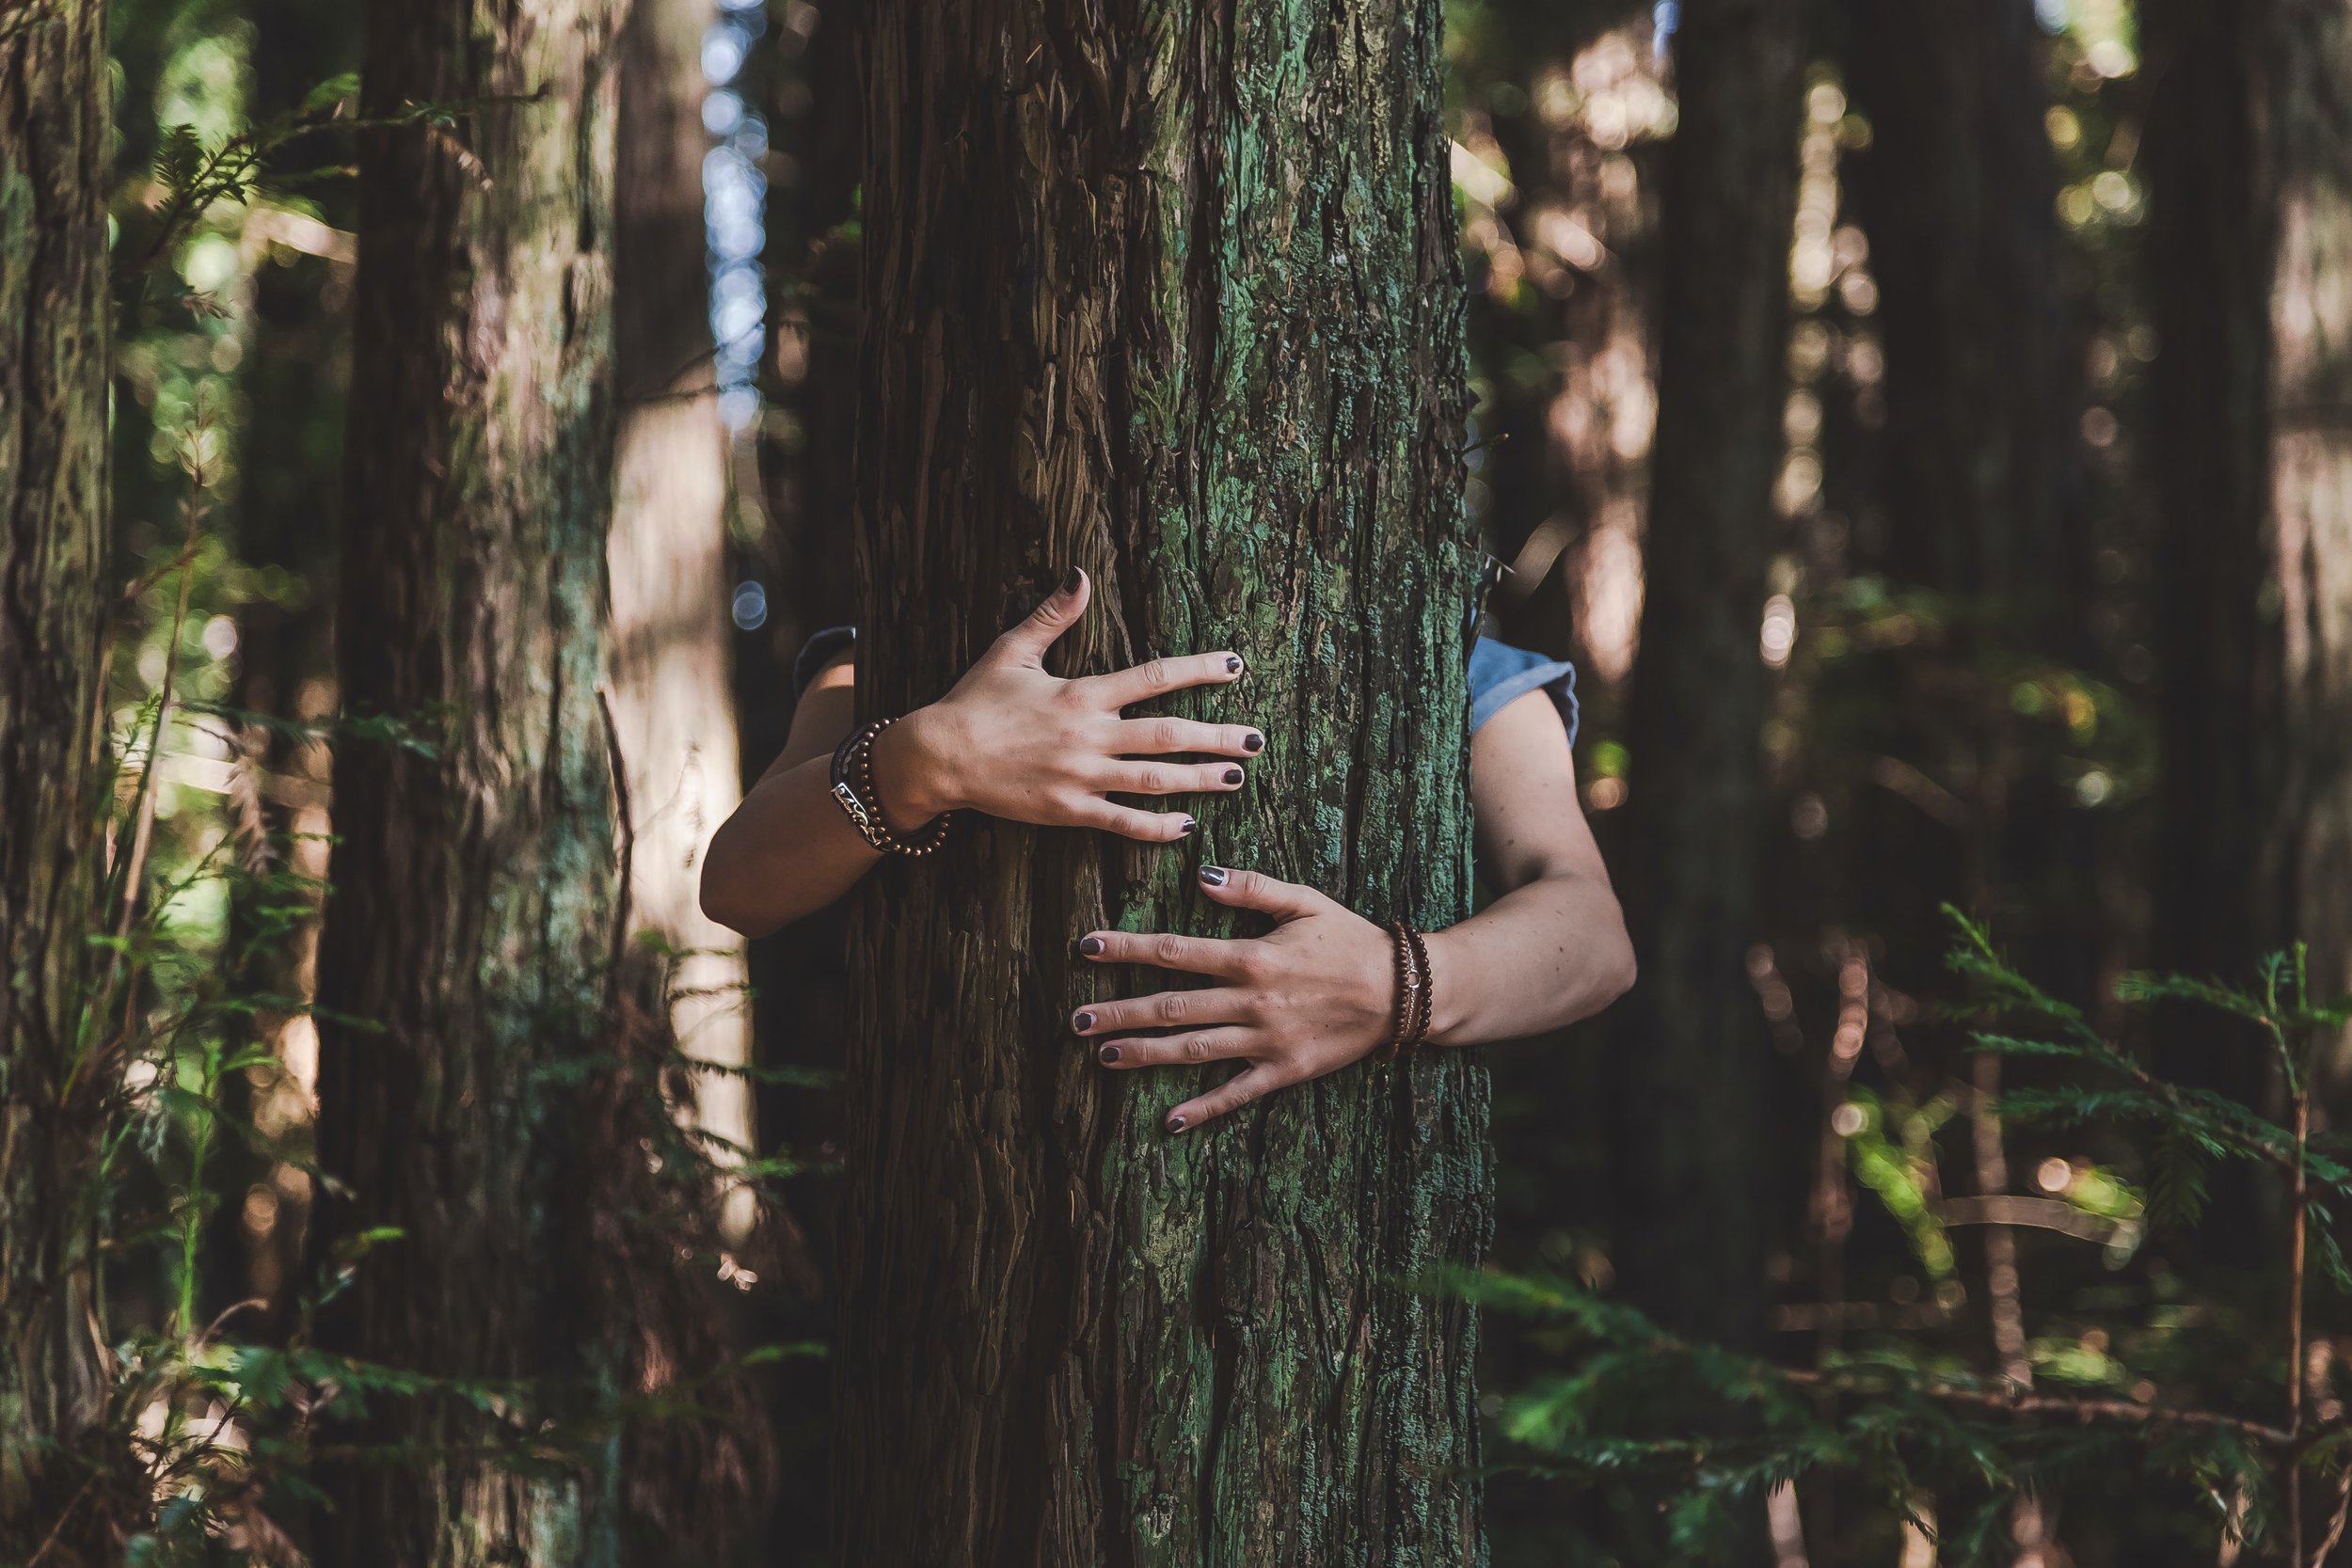 one person is wrapping their arms around a tree in the forest and hugging it. You can only see the person's hands and arms around the tree.